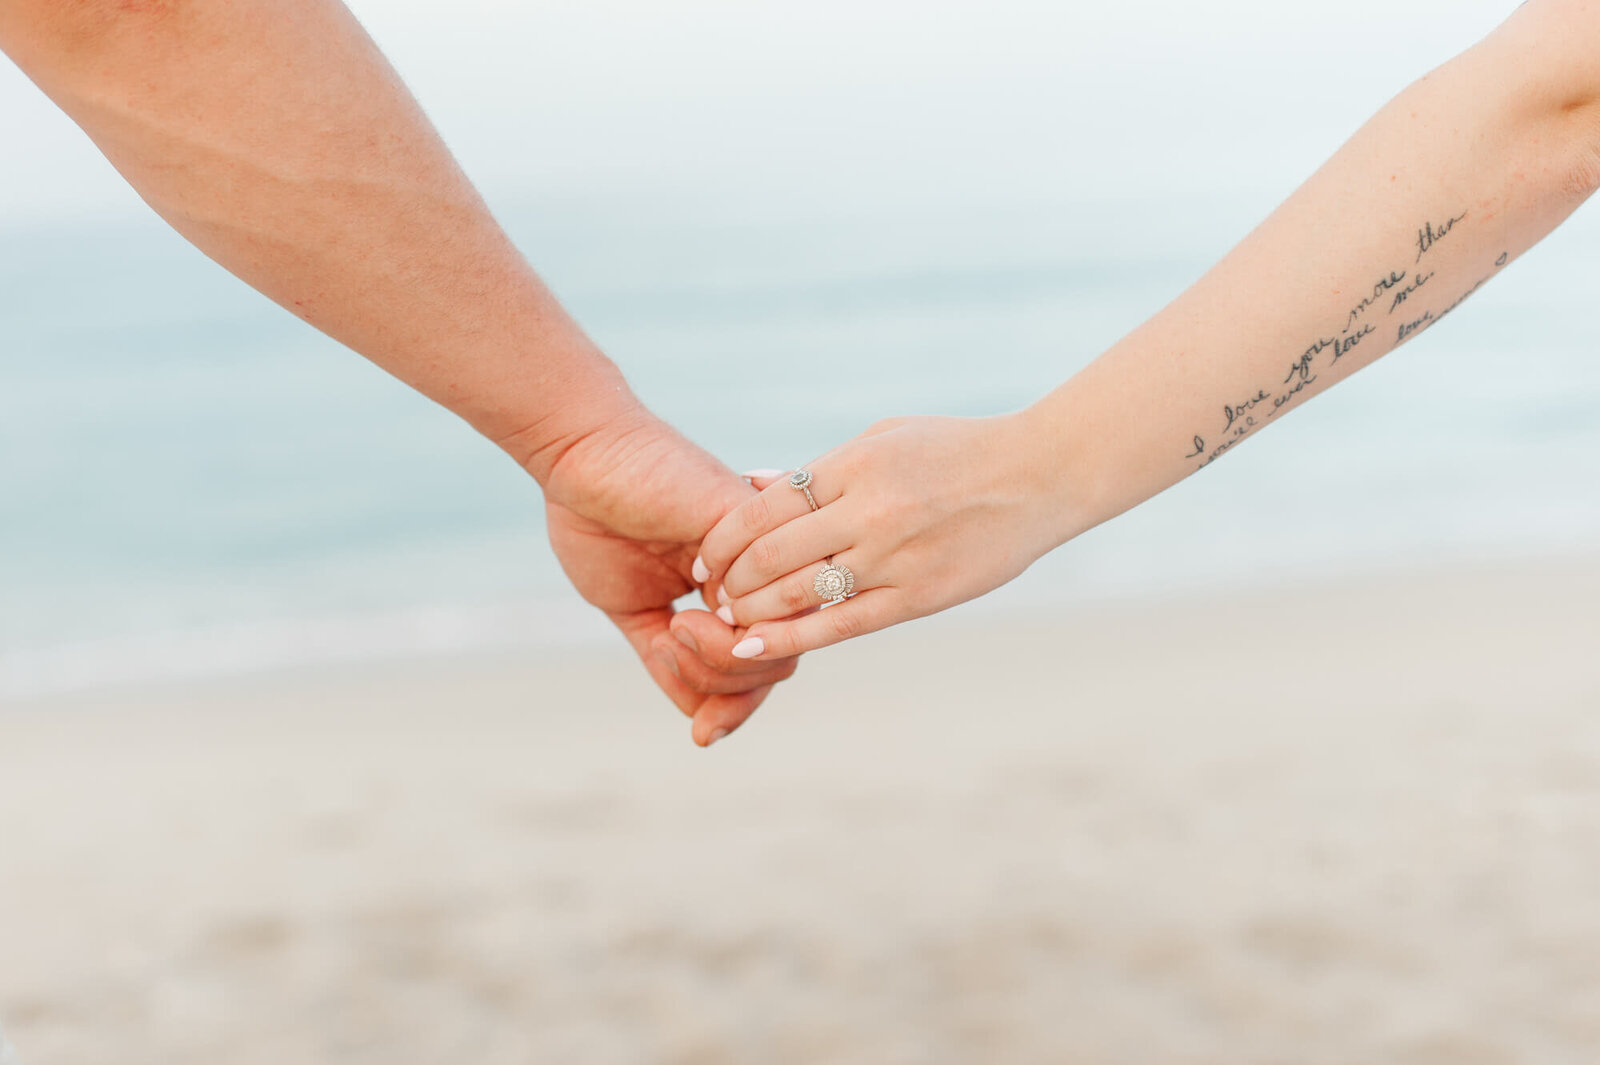 Closeup image of couples holding hands with ring during engagement couples photoshoot